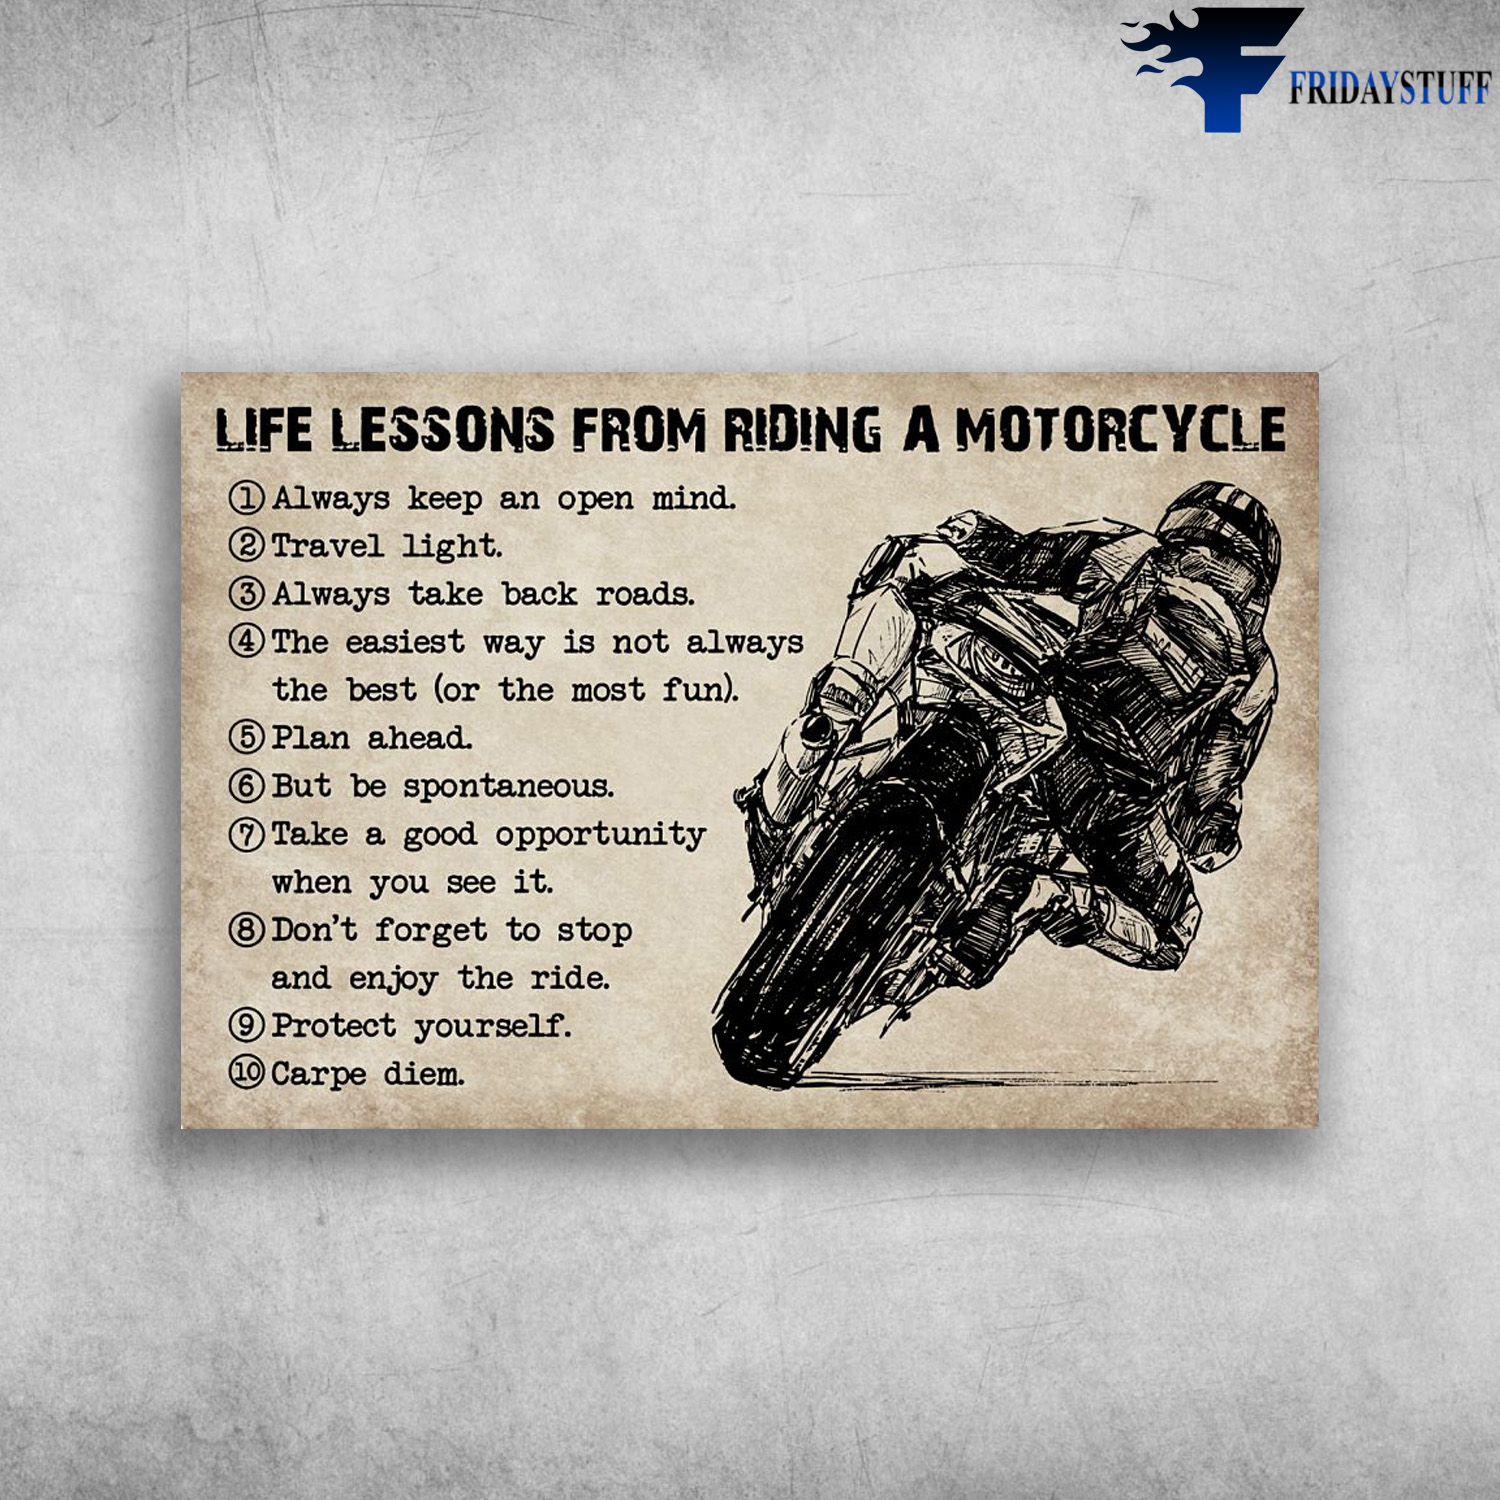 Life Lessons From Riding A Motorcycle - Always Keep An Open Mind, Travel Light, Always Take Back Roads, The Easiest Way Is Not Always The Best, Plan Ahead, But Be Spontaneous